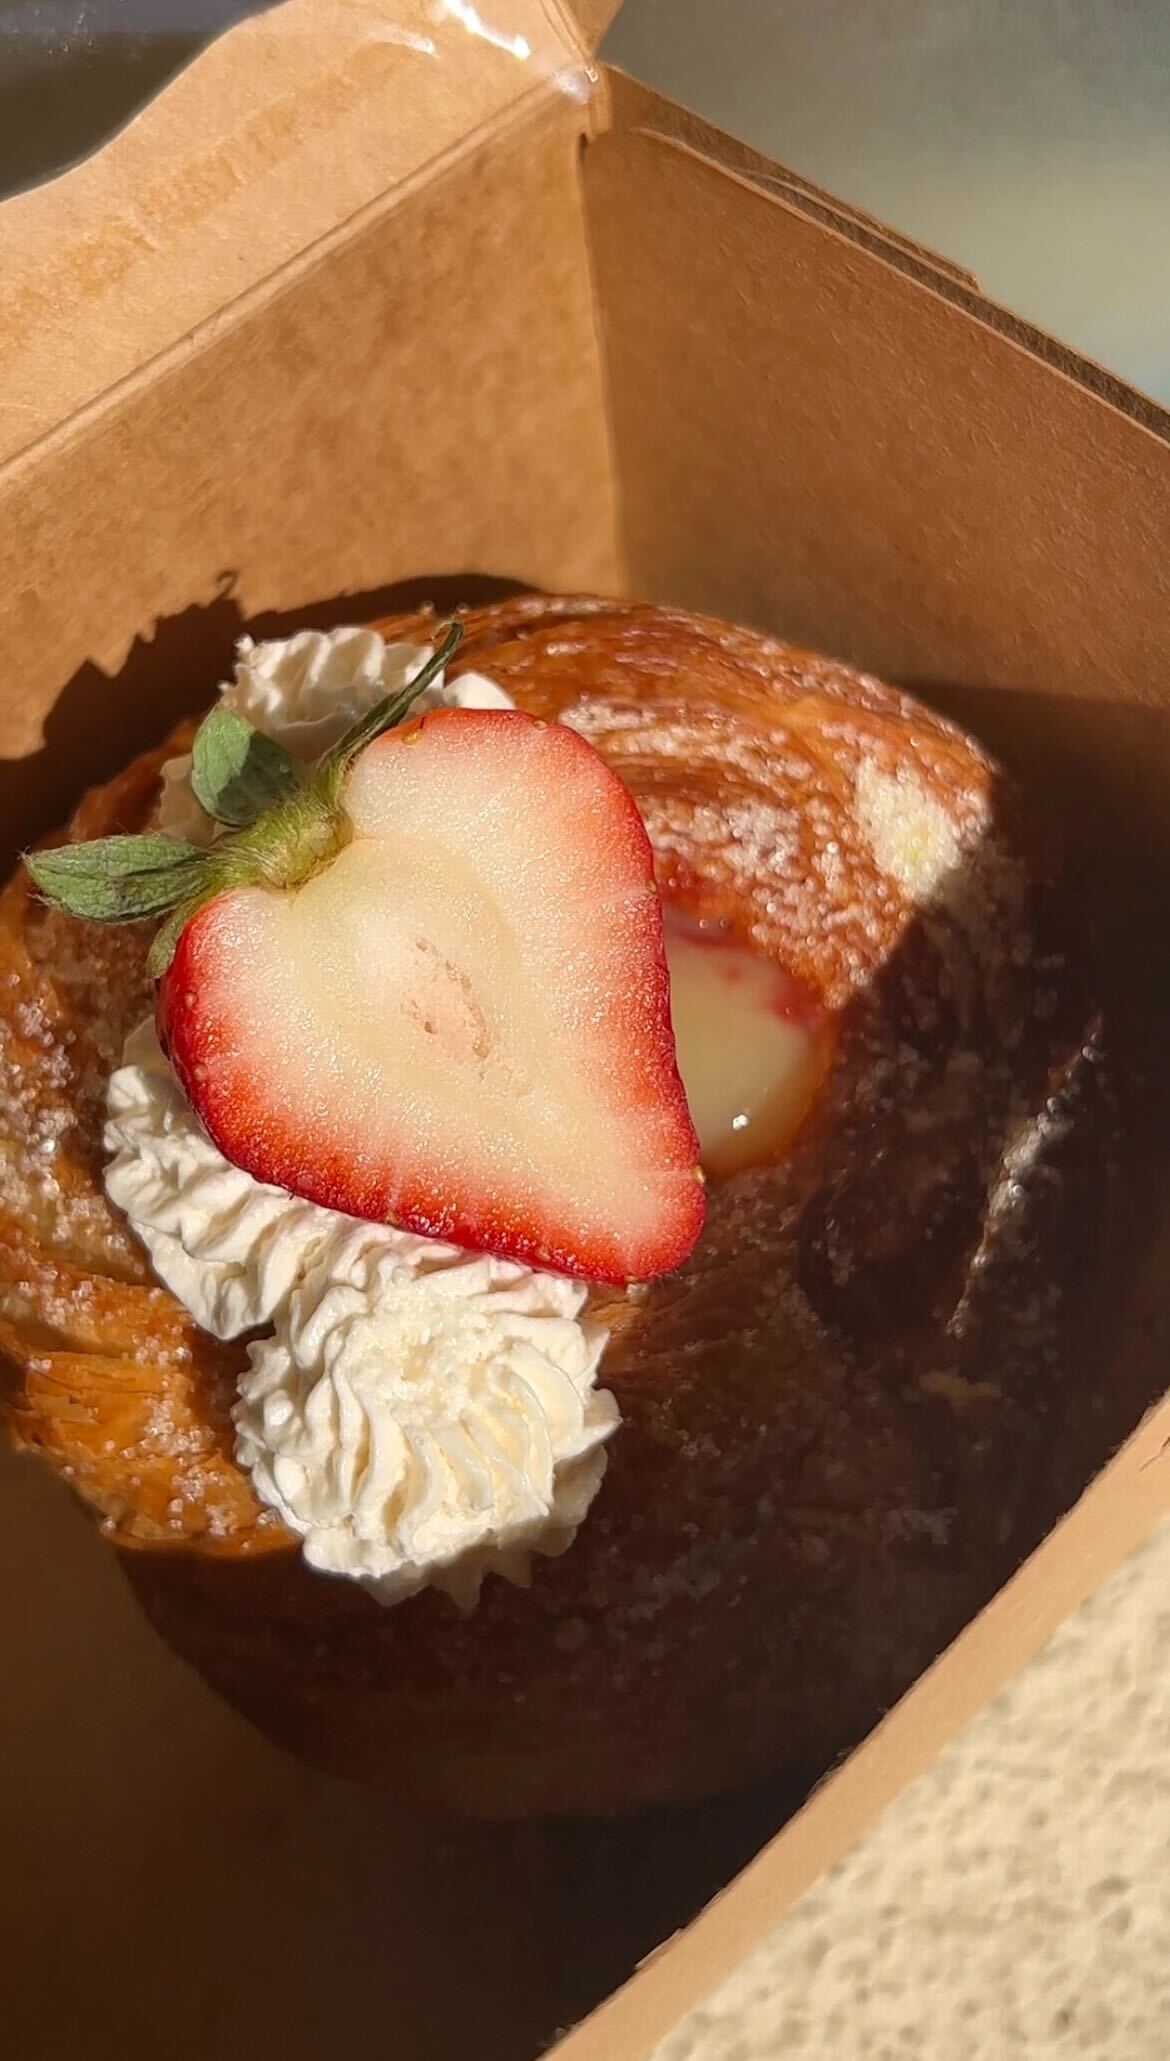 Strawberry Lemon Curd Cruffins at Houlden's Rise Above (Photo by Hannah Hernandez)